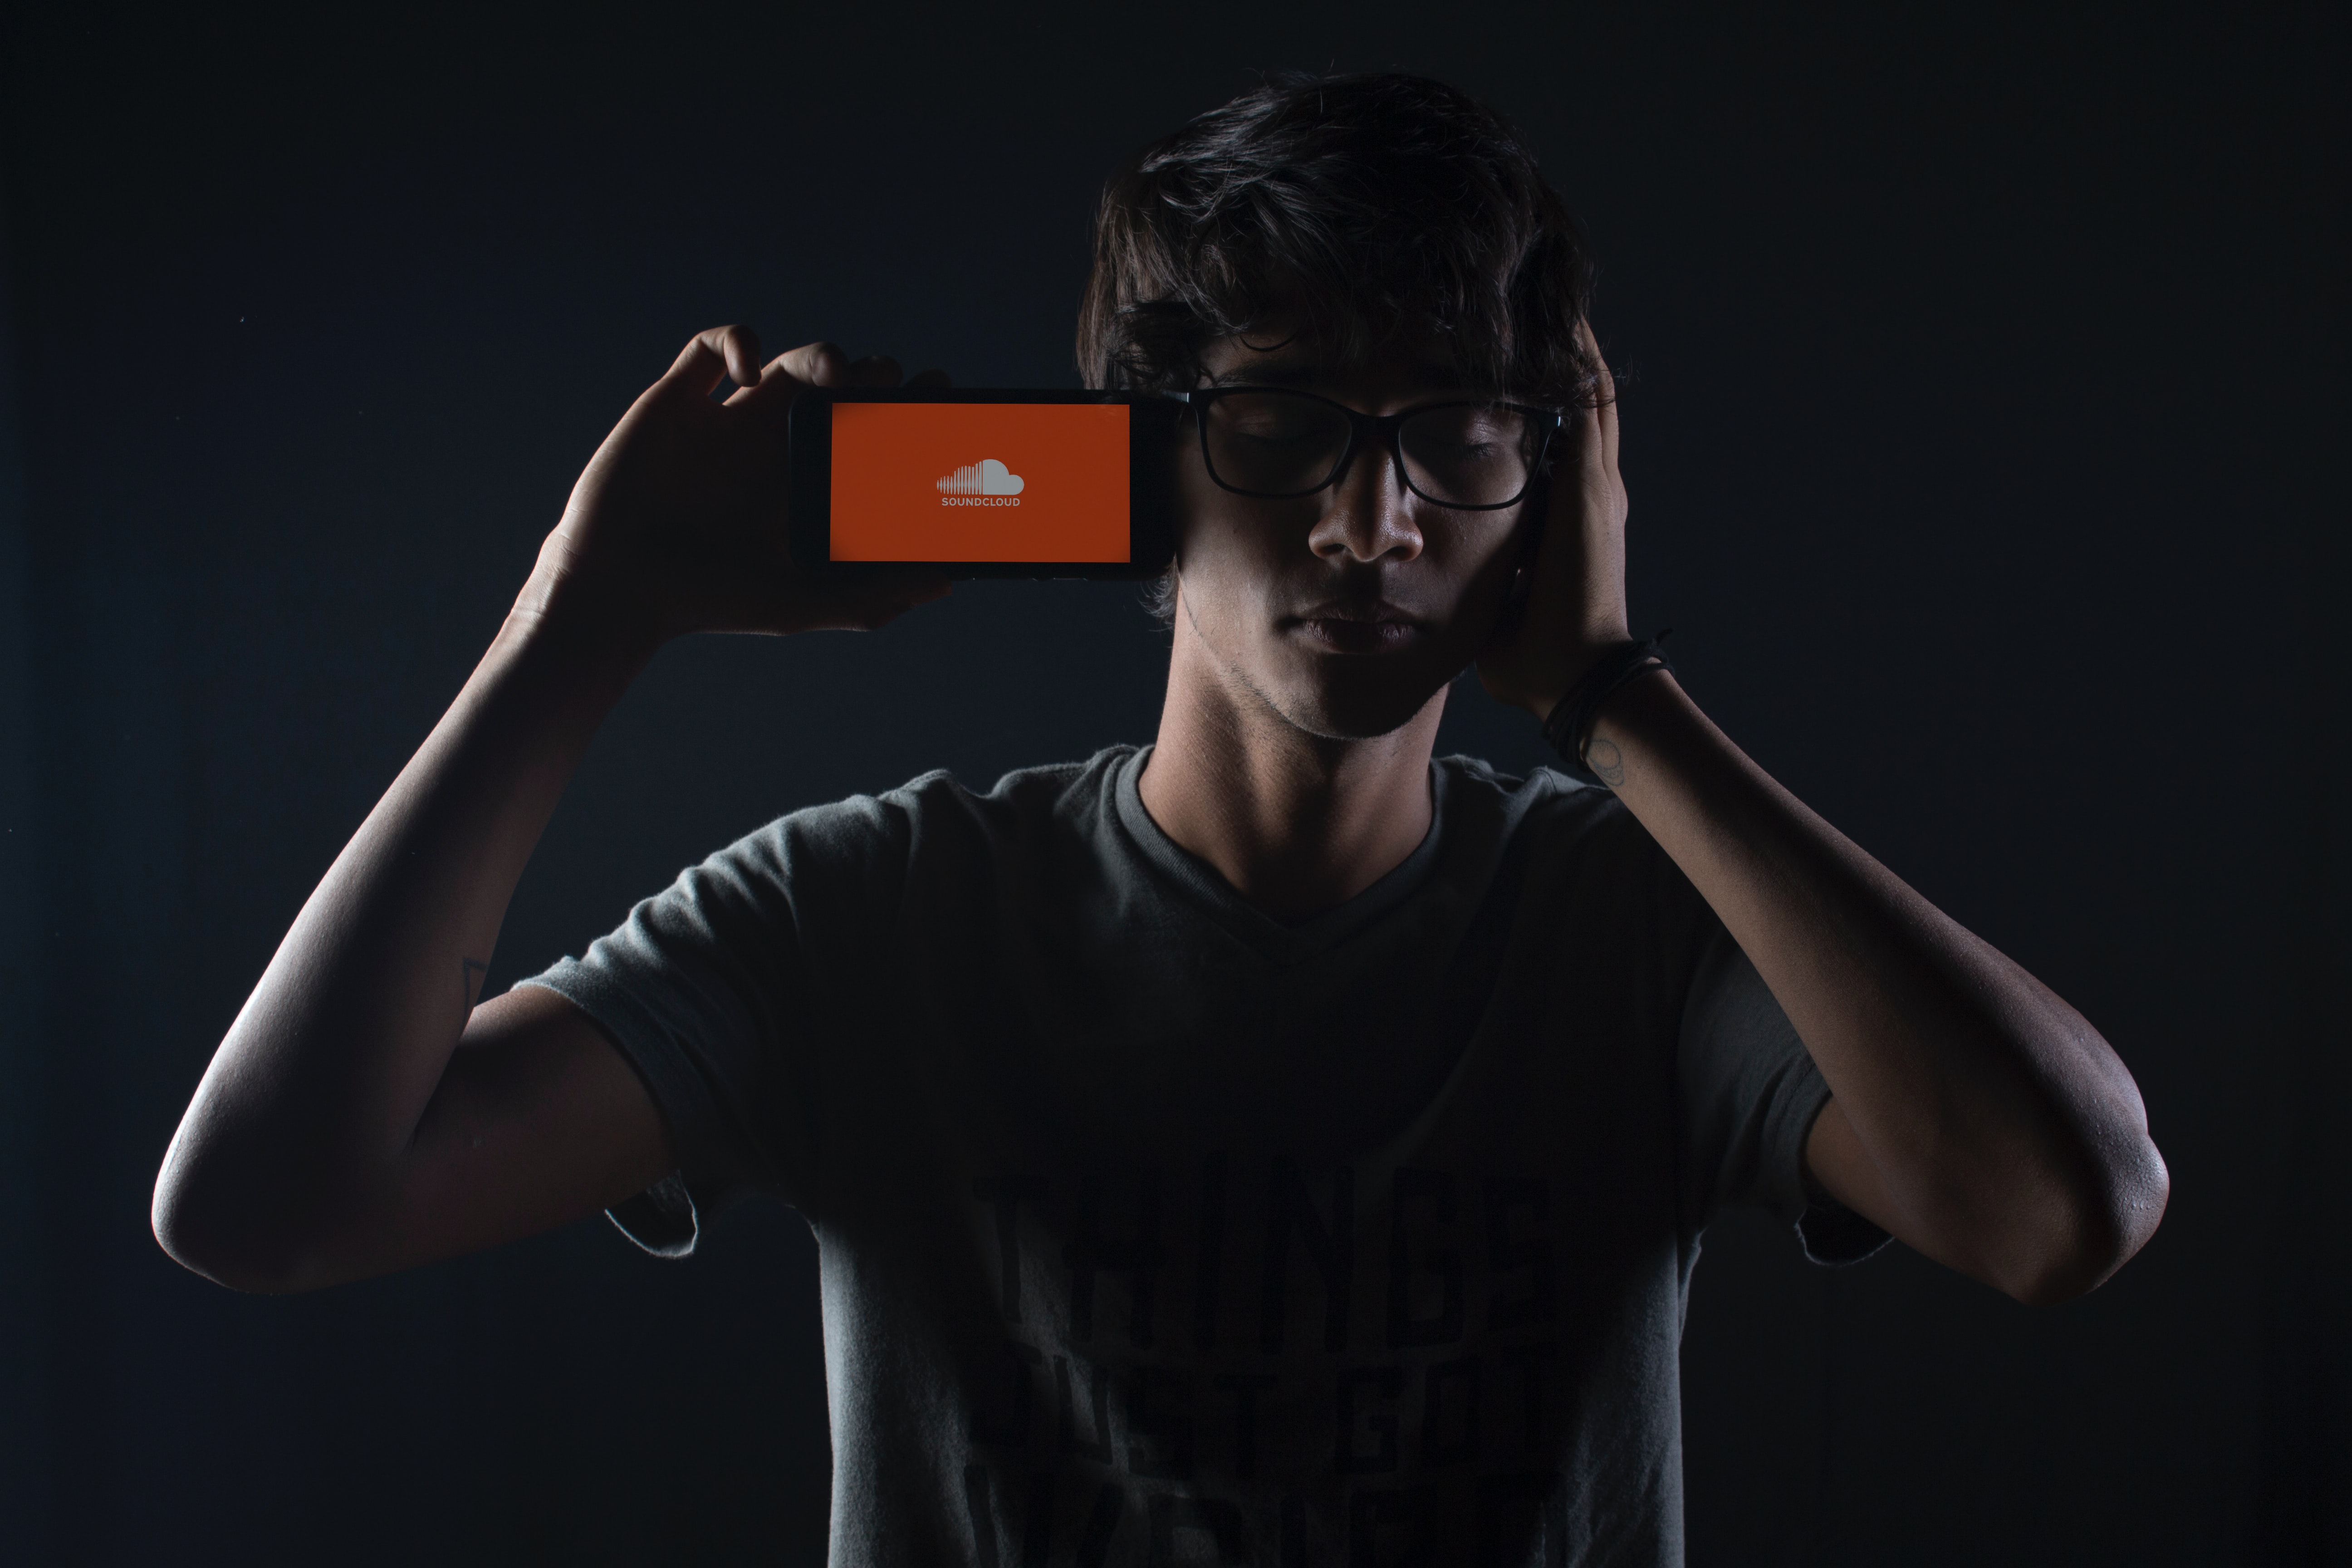 SoundCloud integrate Insights on the mobile app